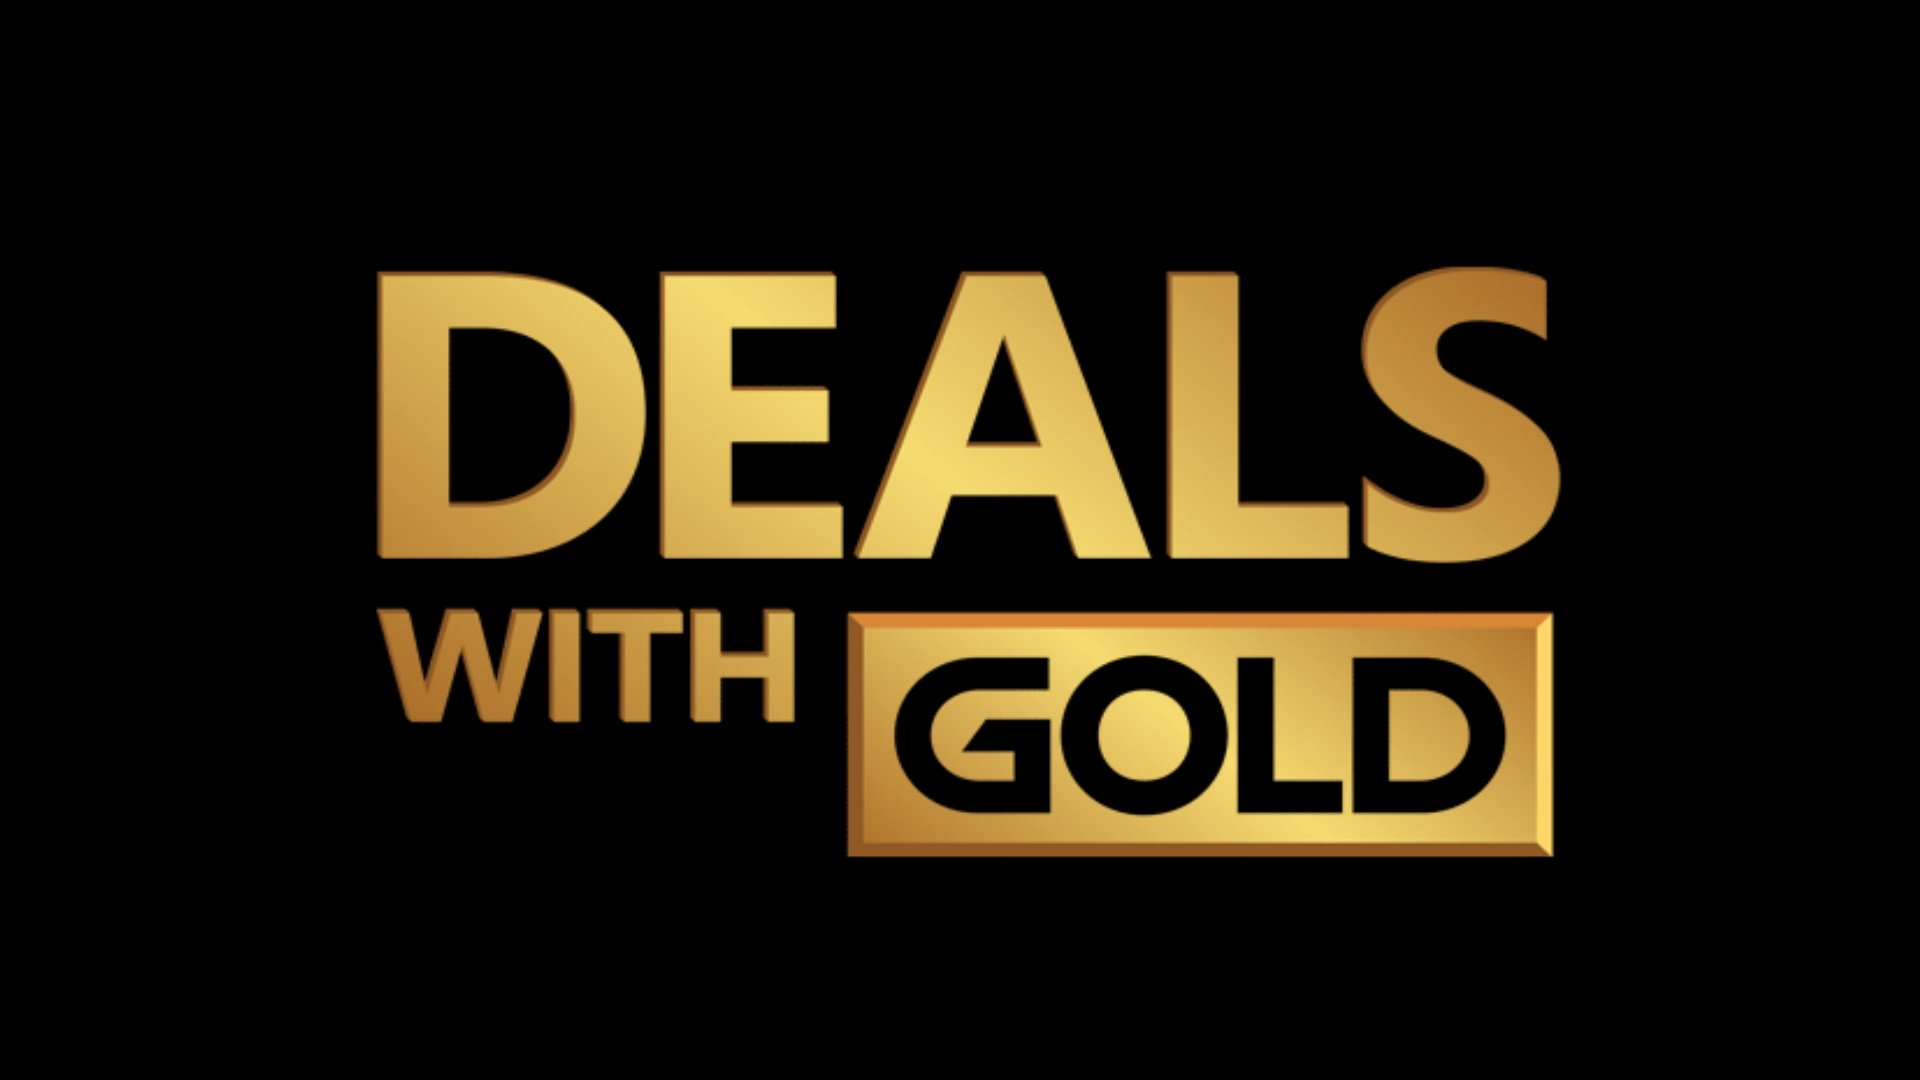 This Week’s Deals with Gold and Spotlight Sale (Week of August 15)